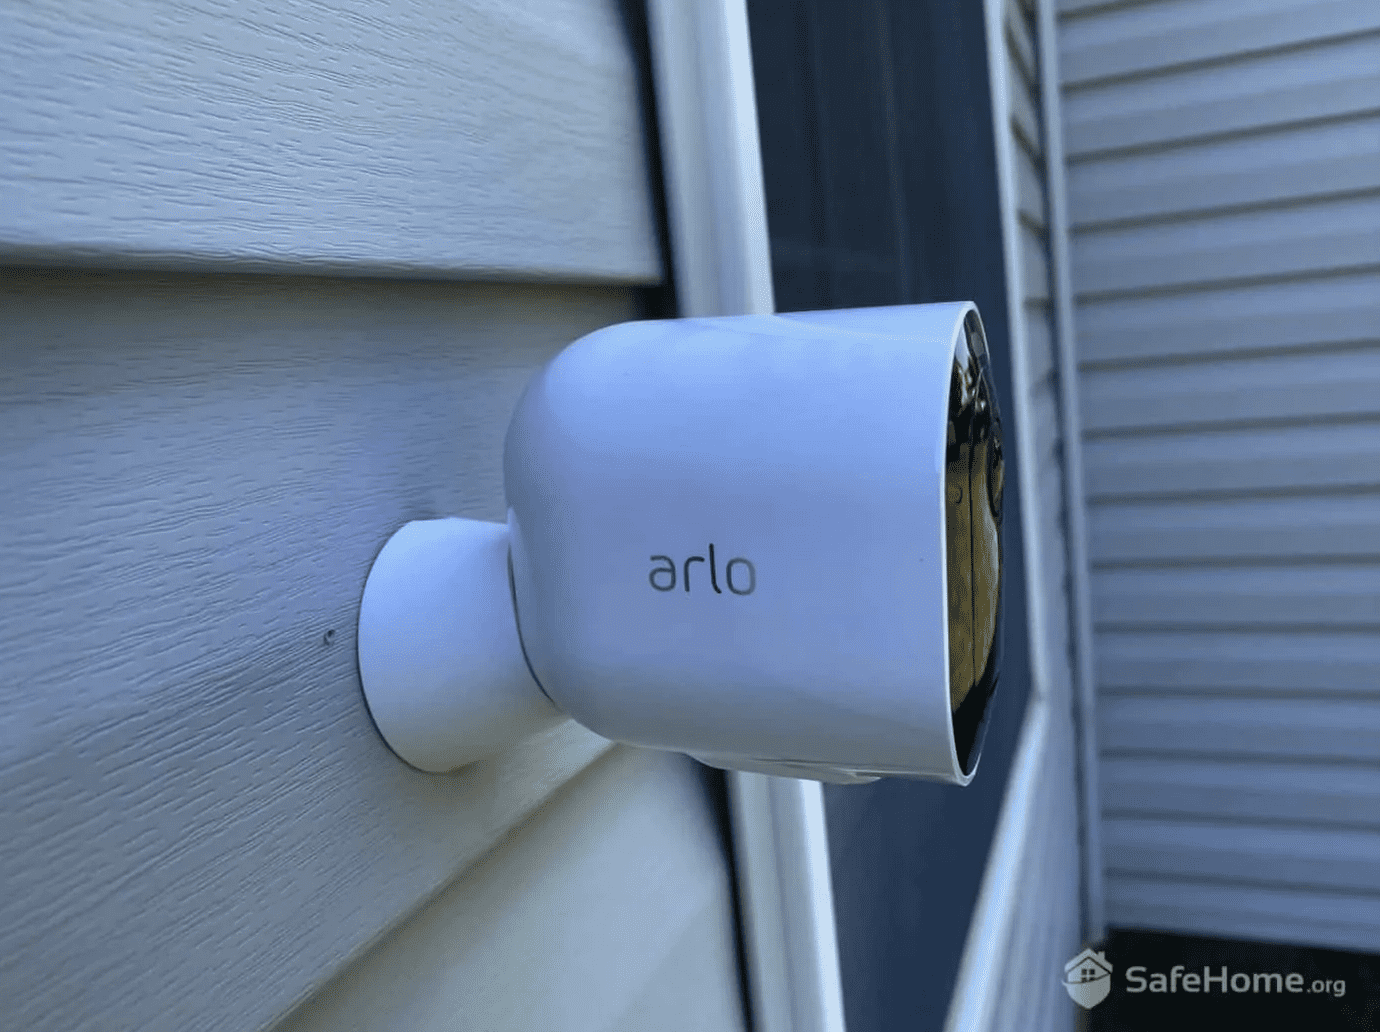 An Arlo Pro 3 security camera mounted outside.